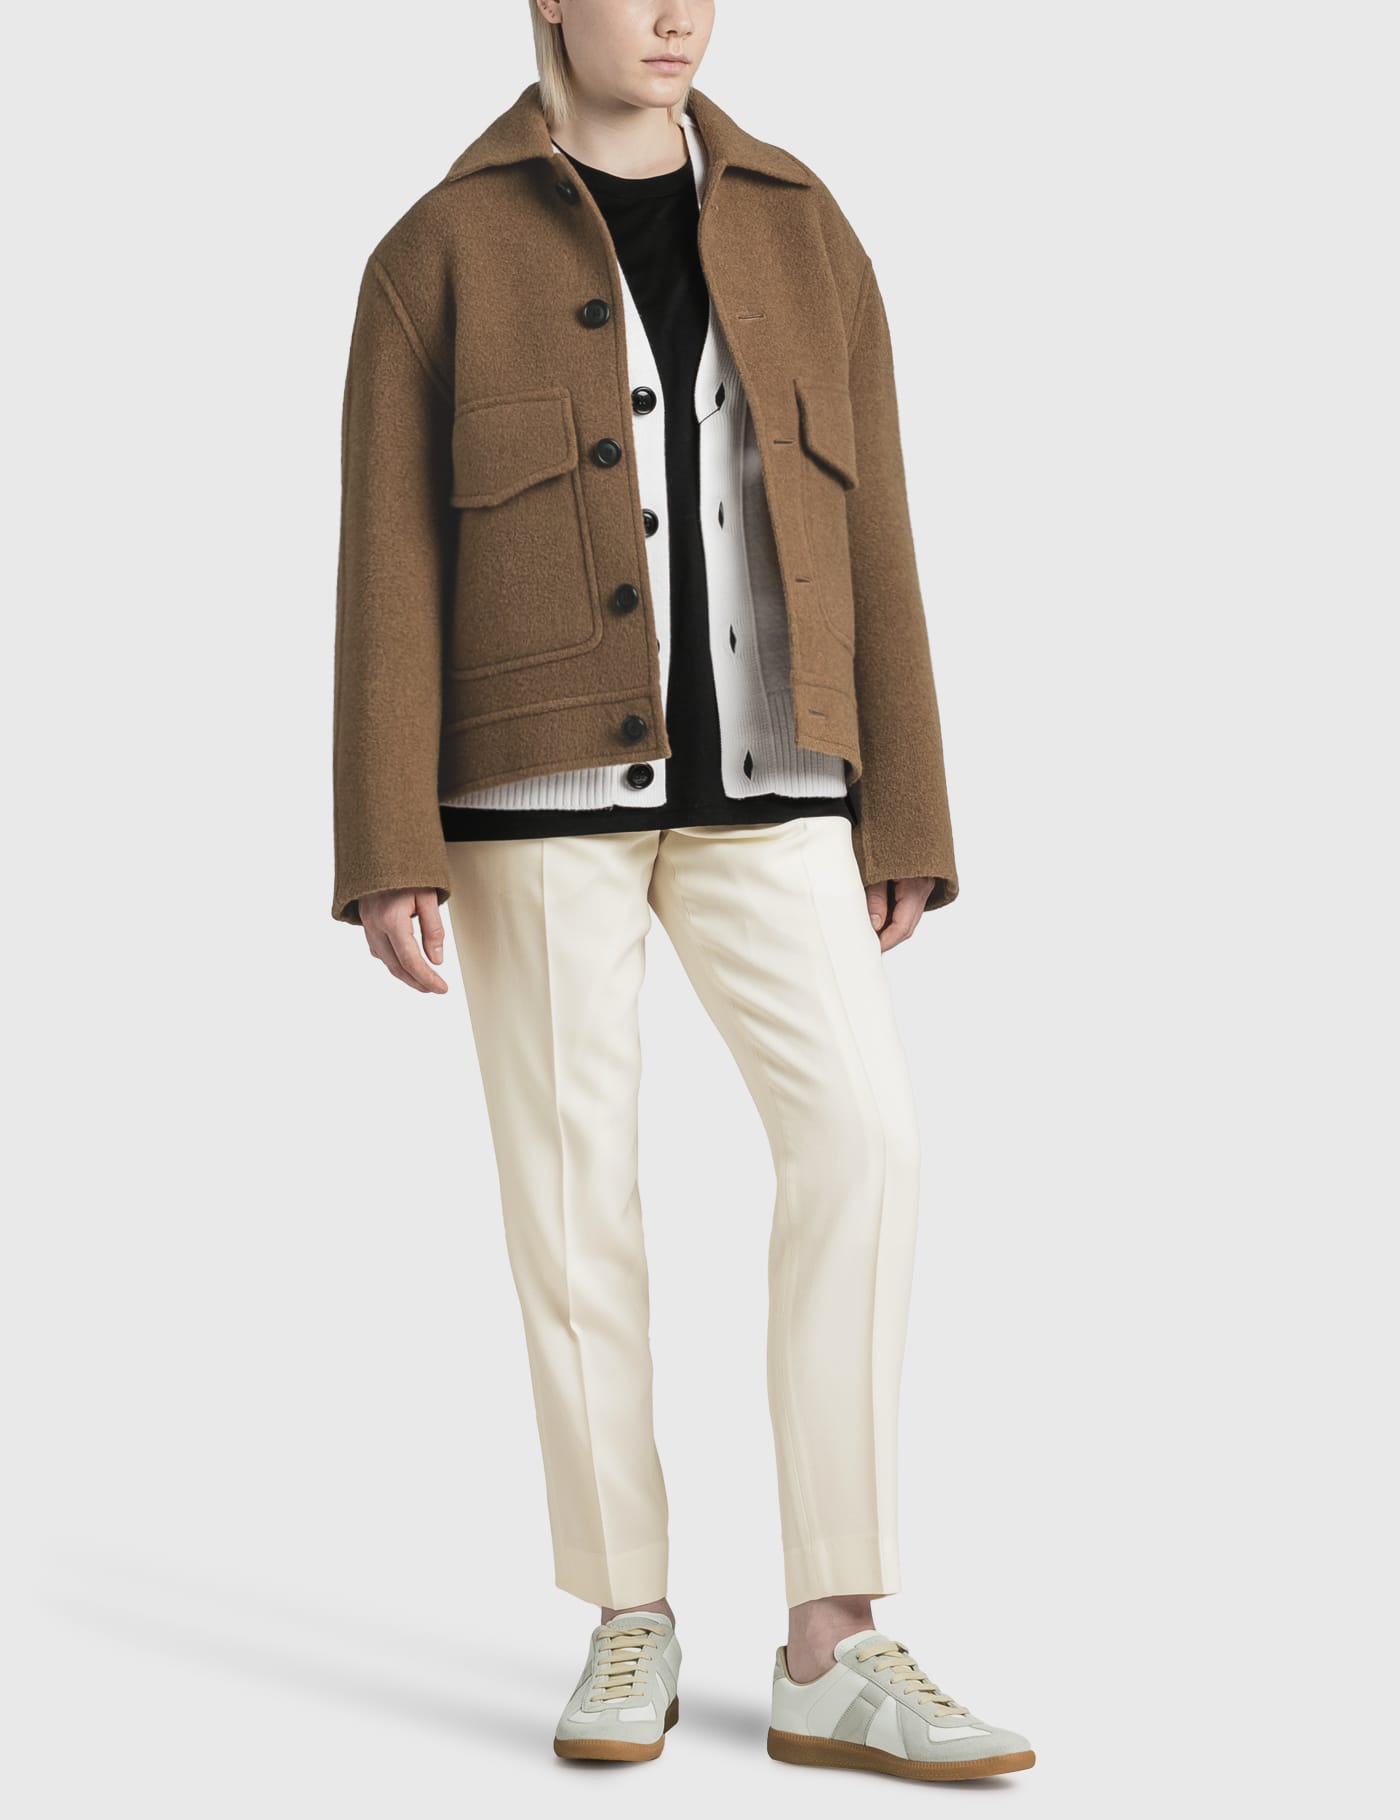 Ami - Short Double Face Coat | HBX - Globally Curated Fashion and